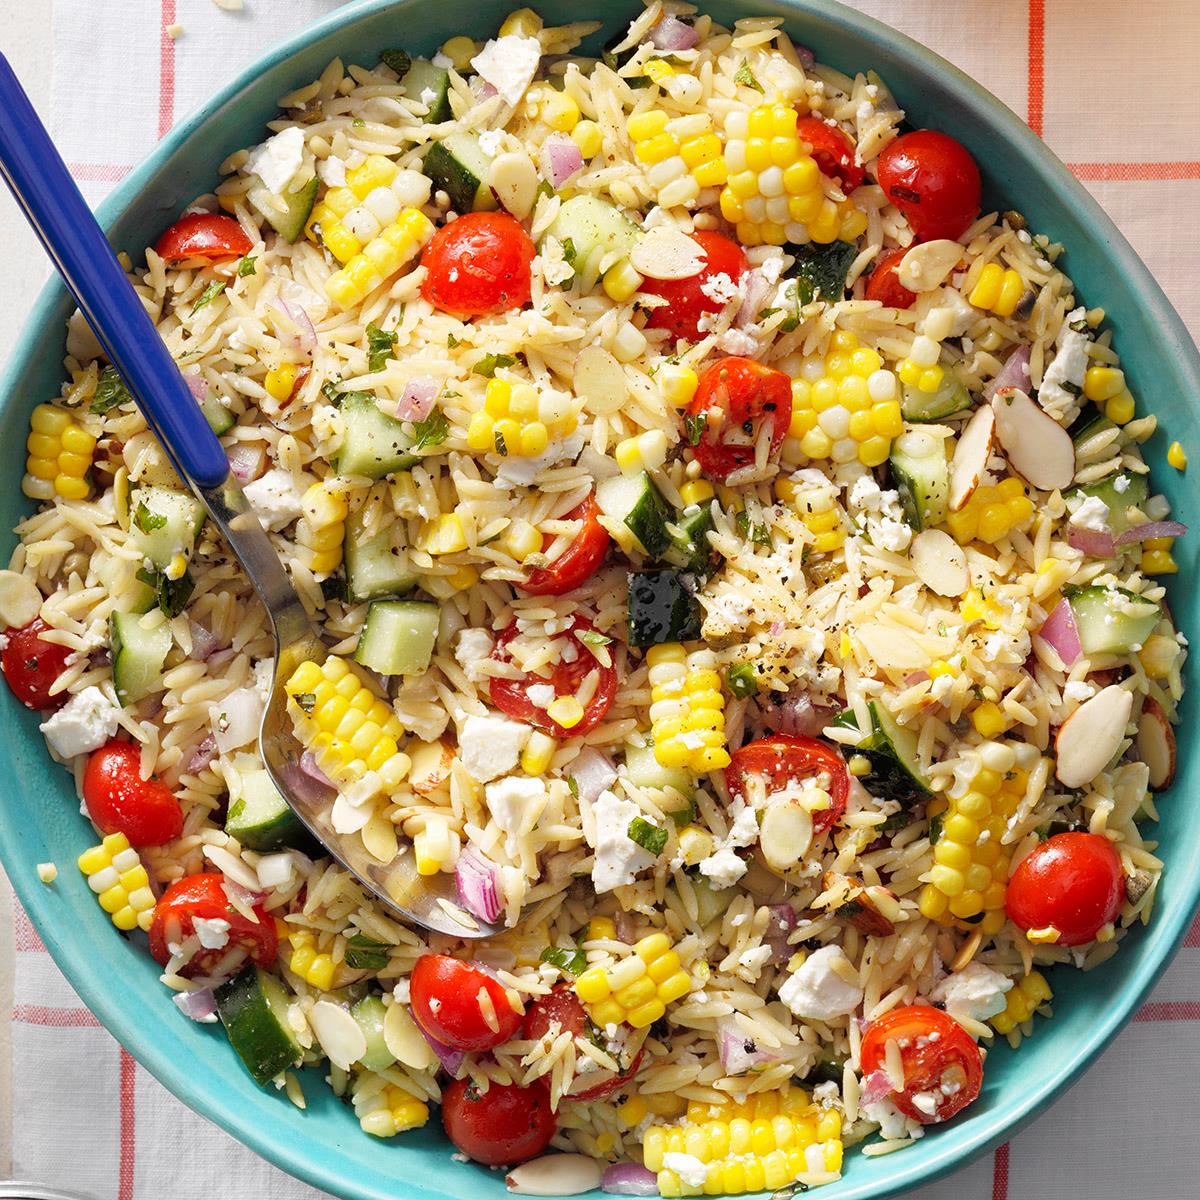 Summer Orzo Recipe: How to Make It